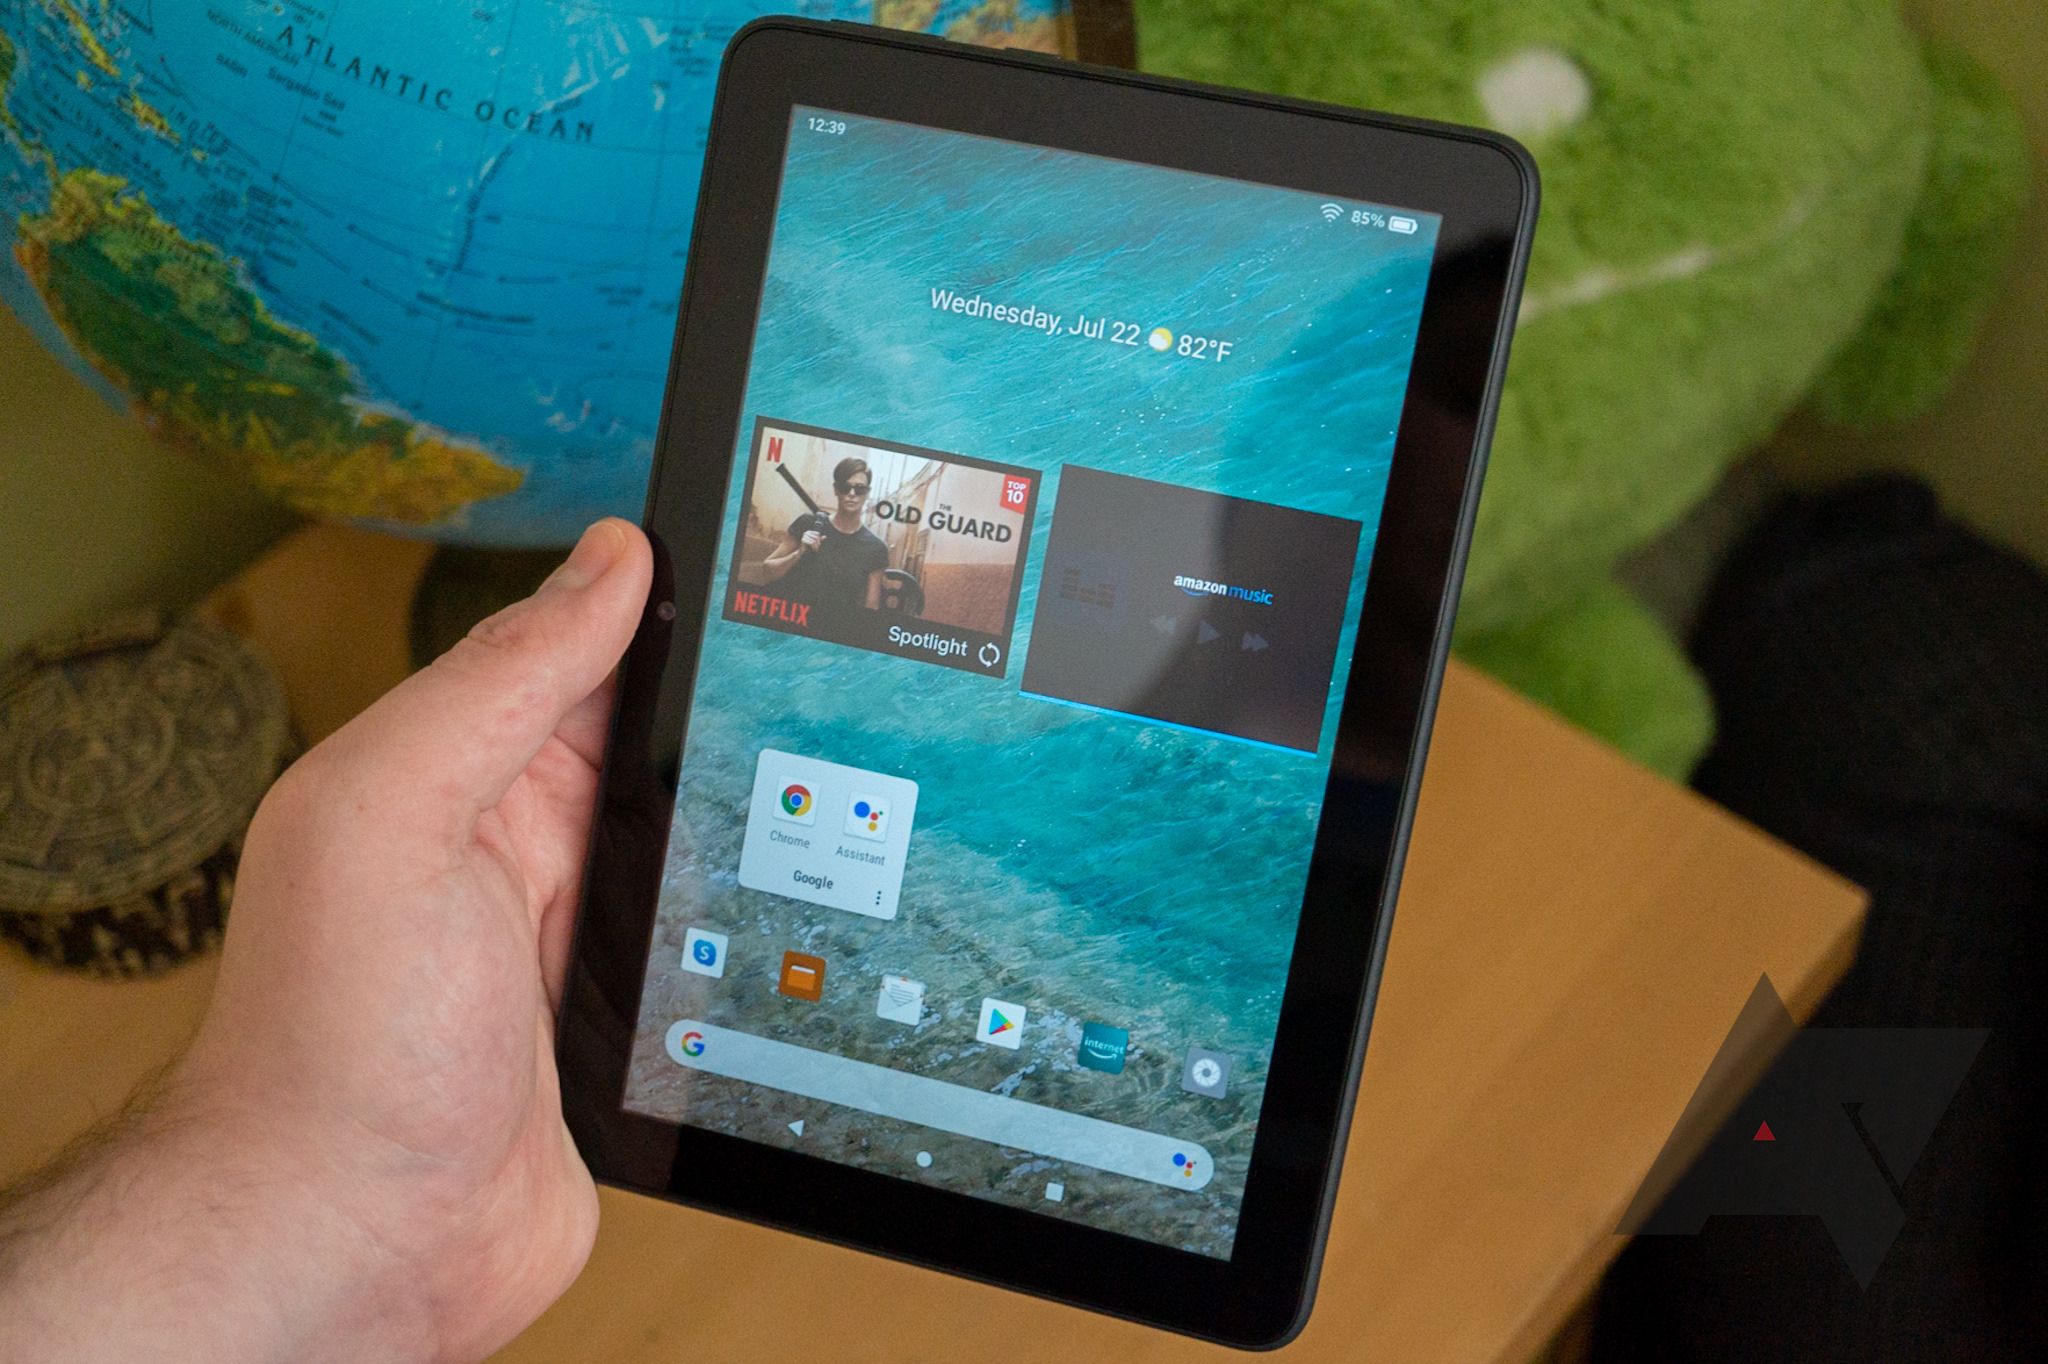 how toput your info on an older kindle fire